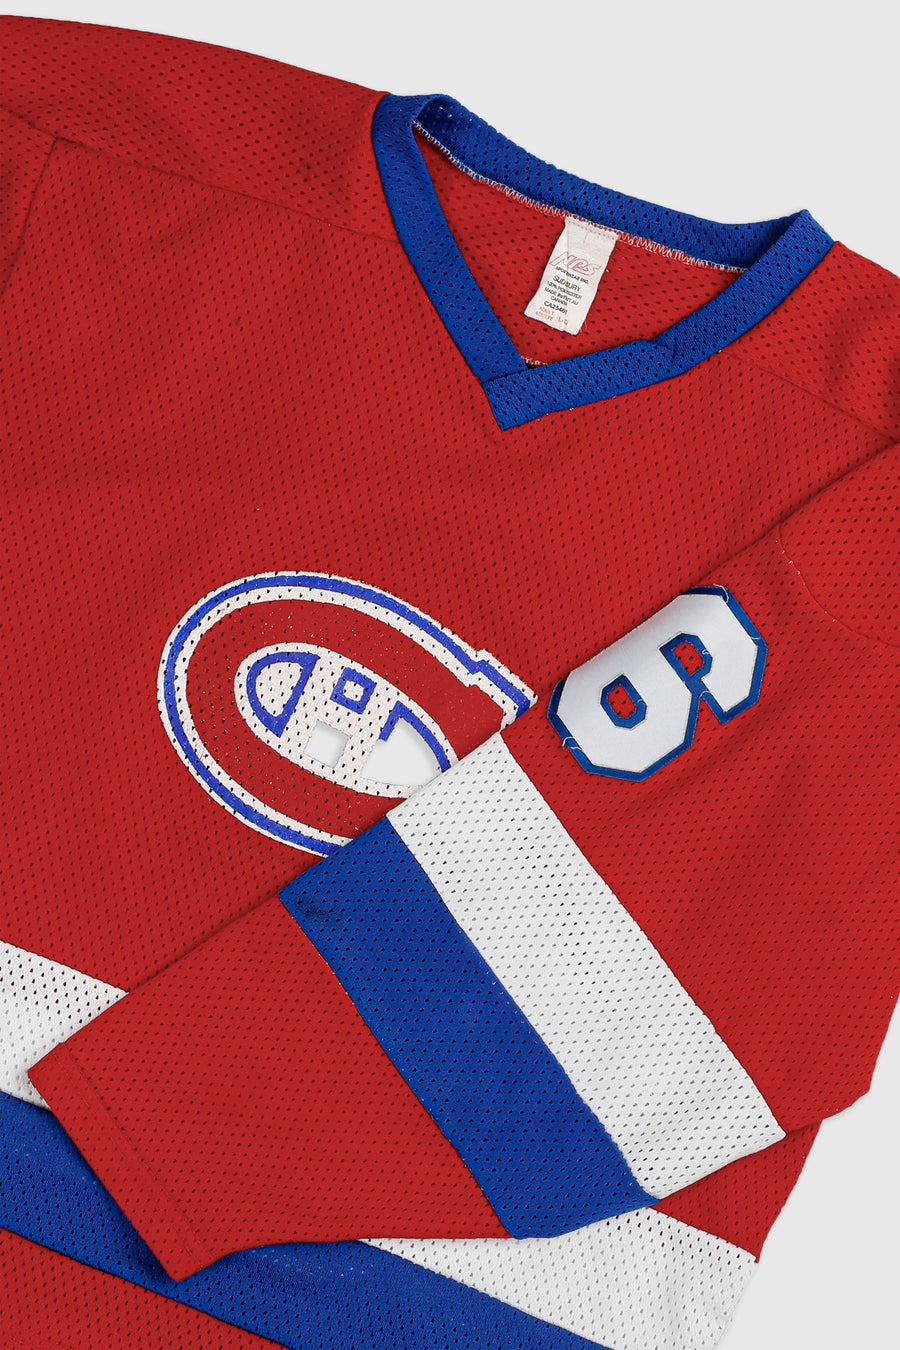 Vintage Montreal Canadiens NHL Jersey - L